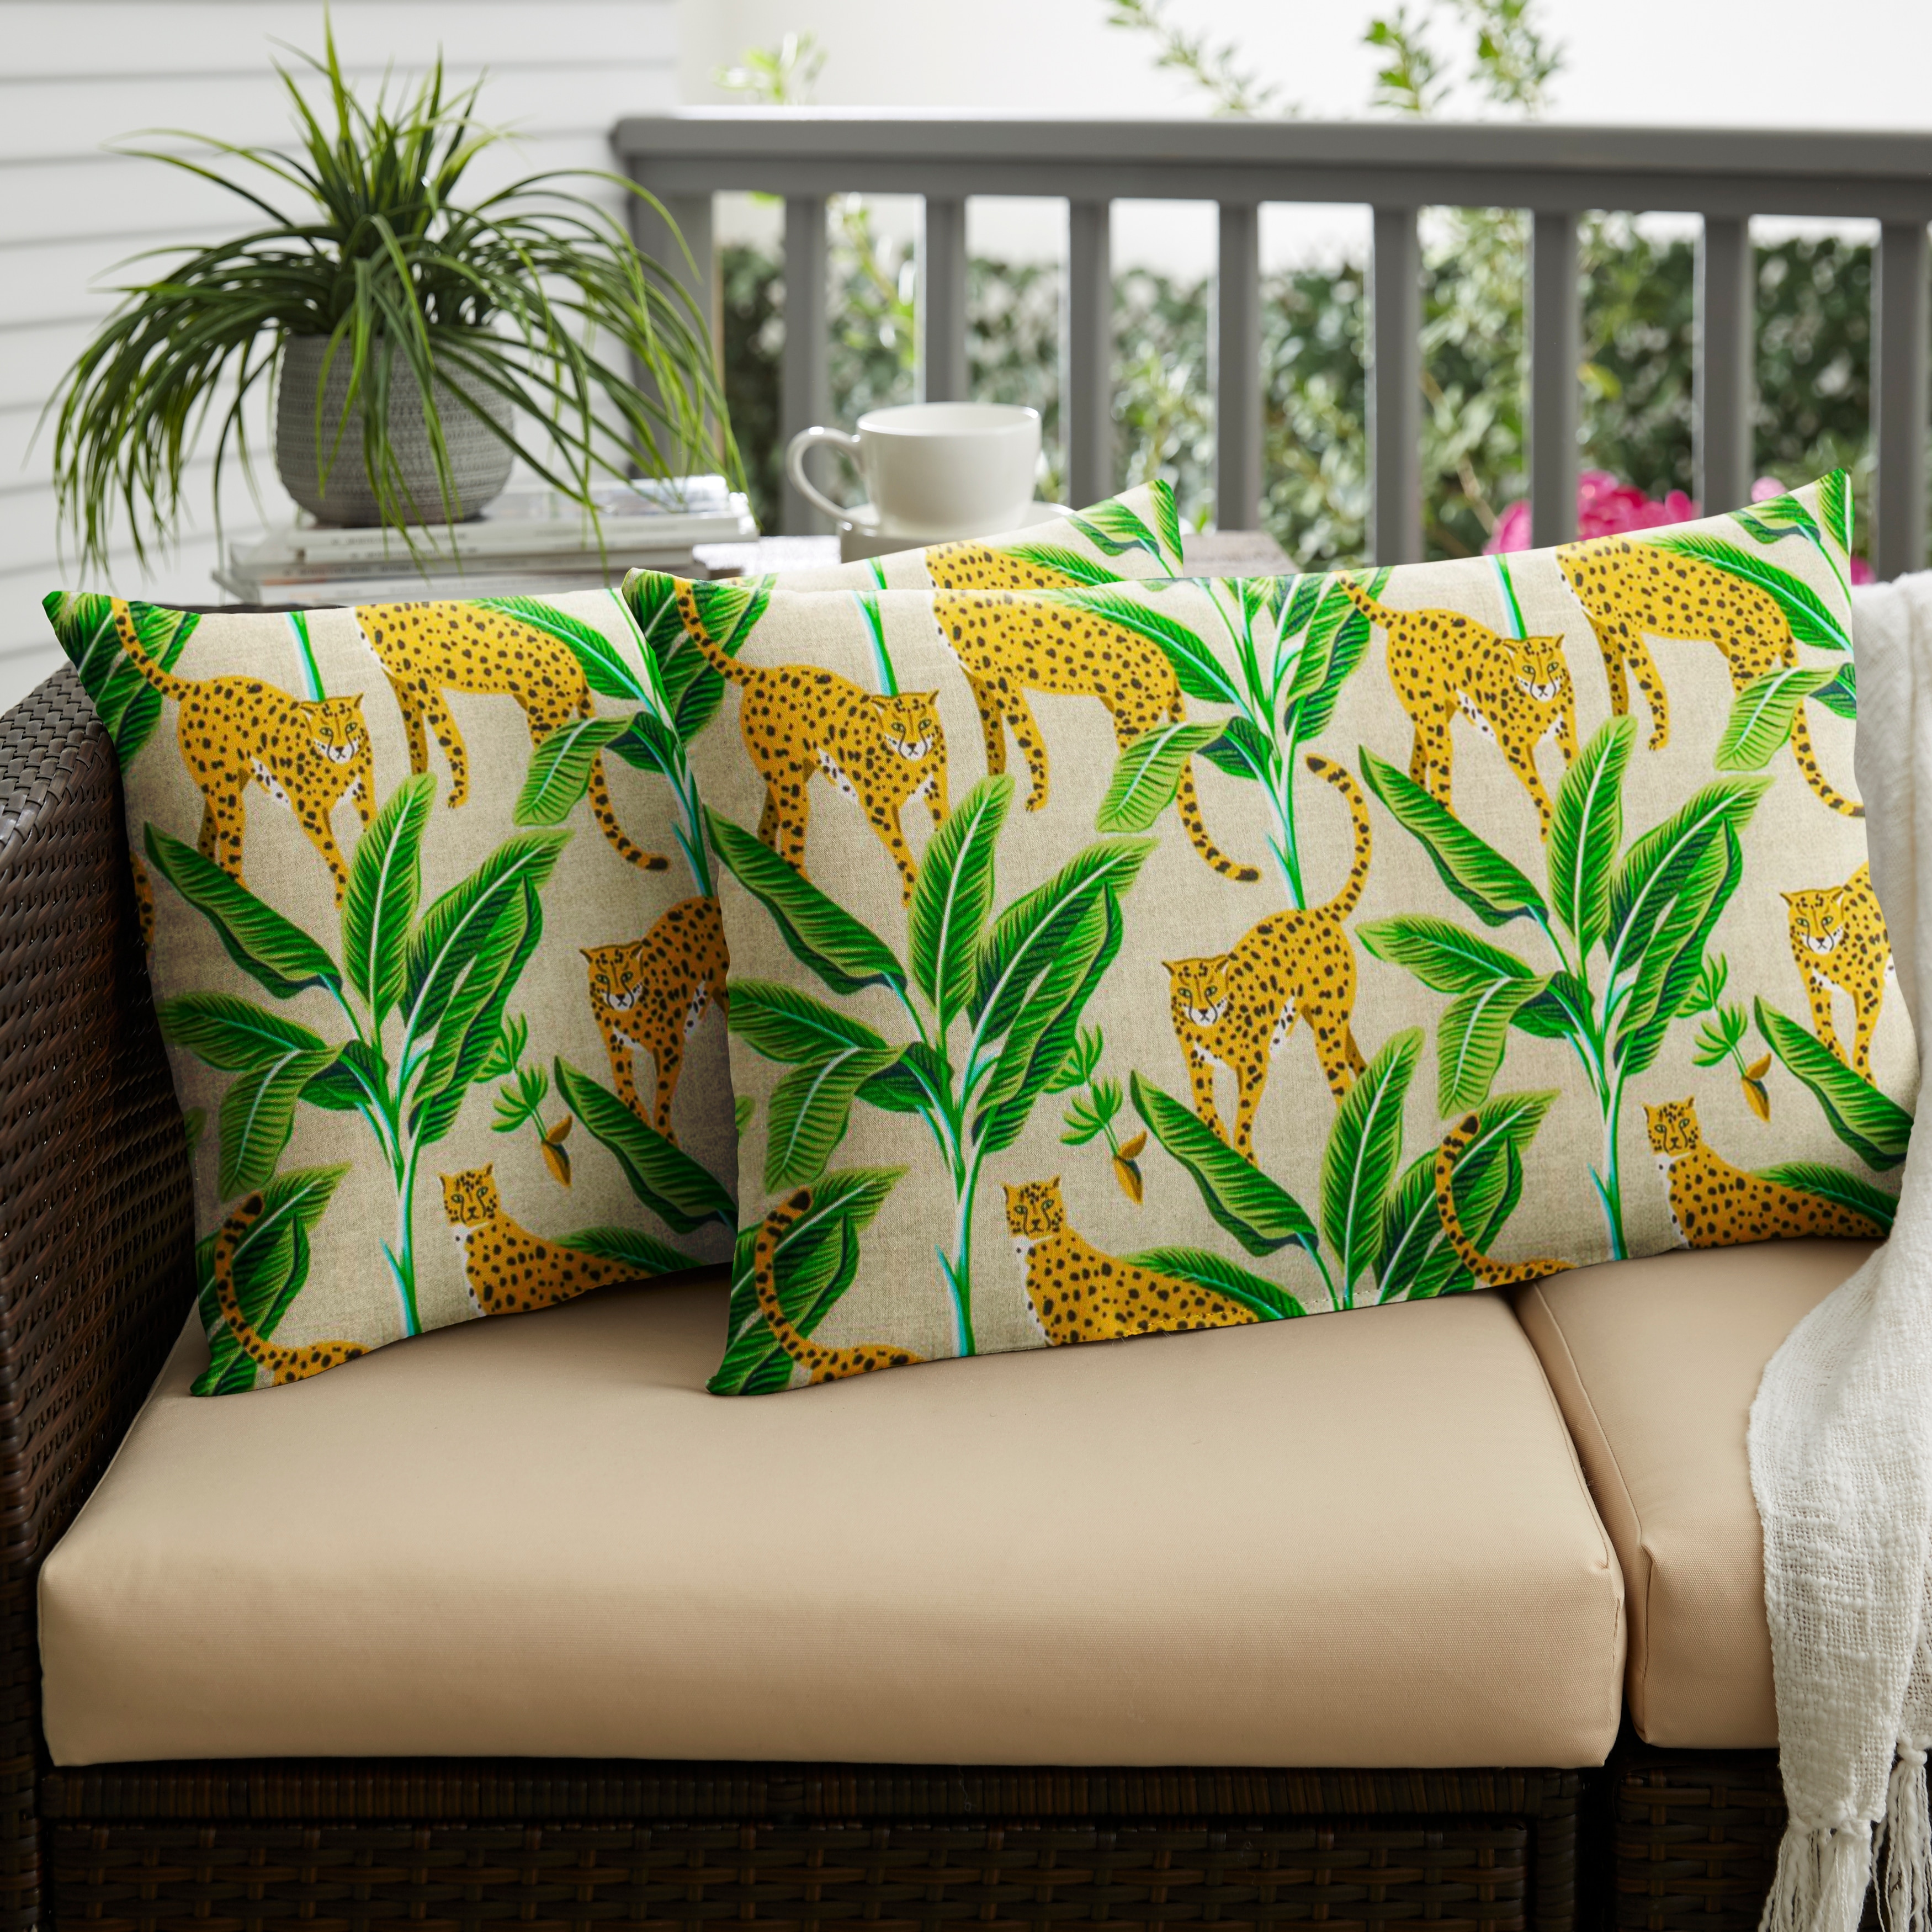 https://ak1.ostkcdn.com/images/products/is/images/direct/f89e5c3b058e1411df3f304c8c1edea8d05a52b3/Yellow-and-Green-Indoor-Outdoor-Pillows%2C-Set-of-2%2C-Knife-Edge.jpg